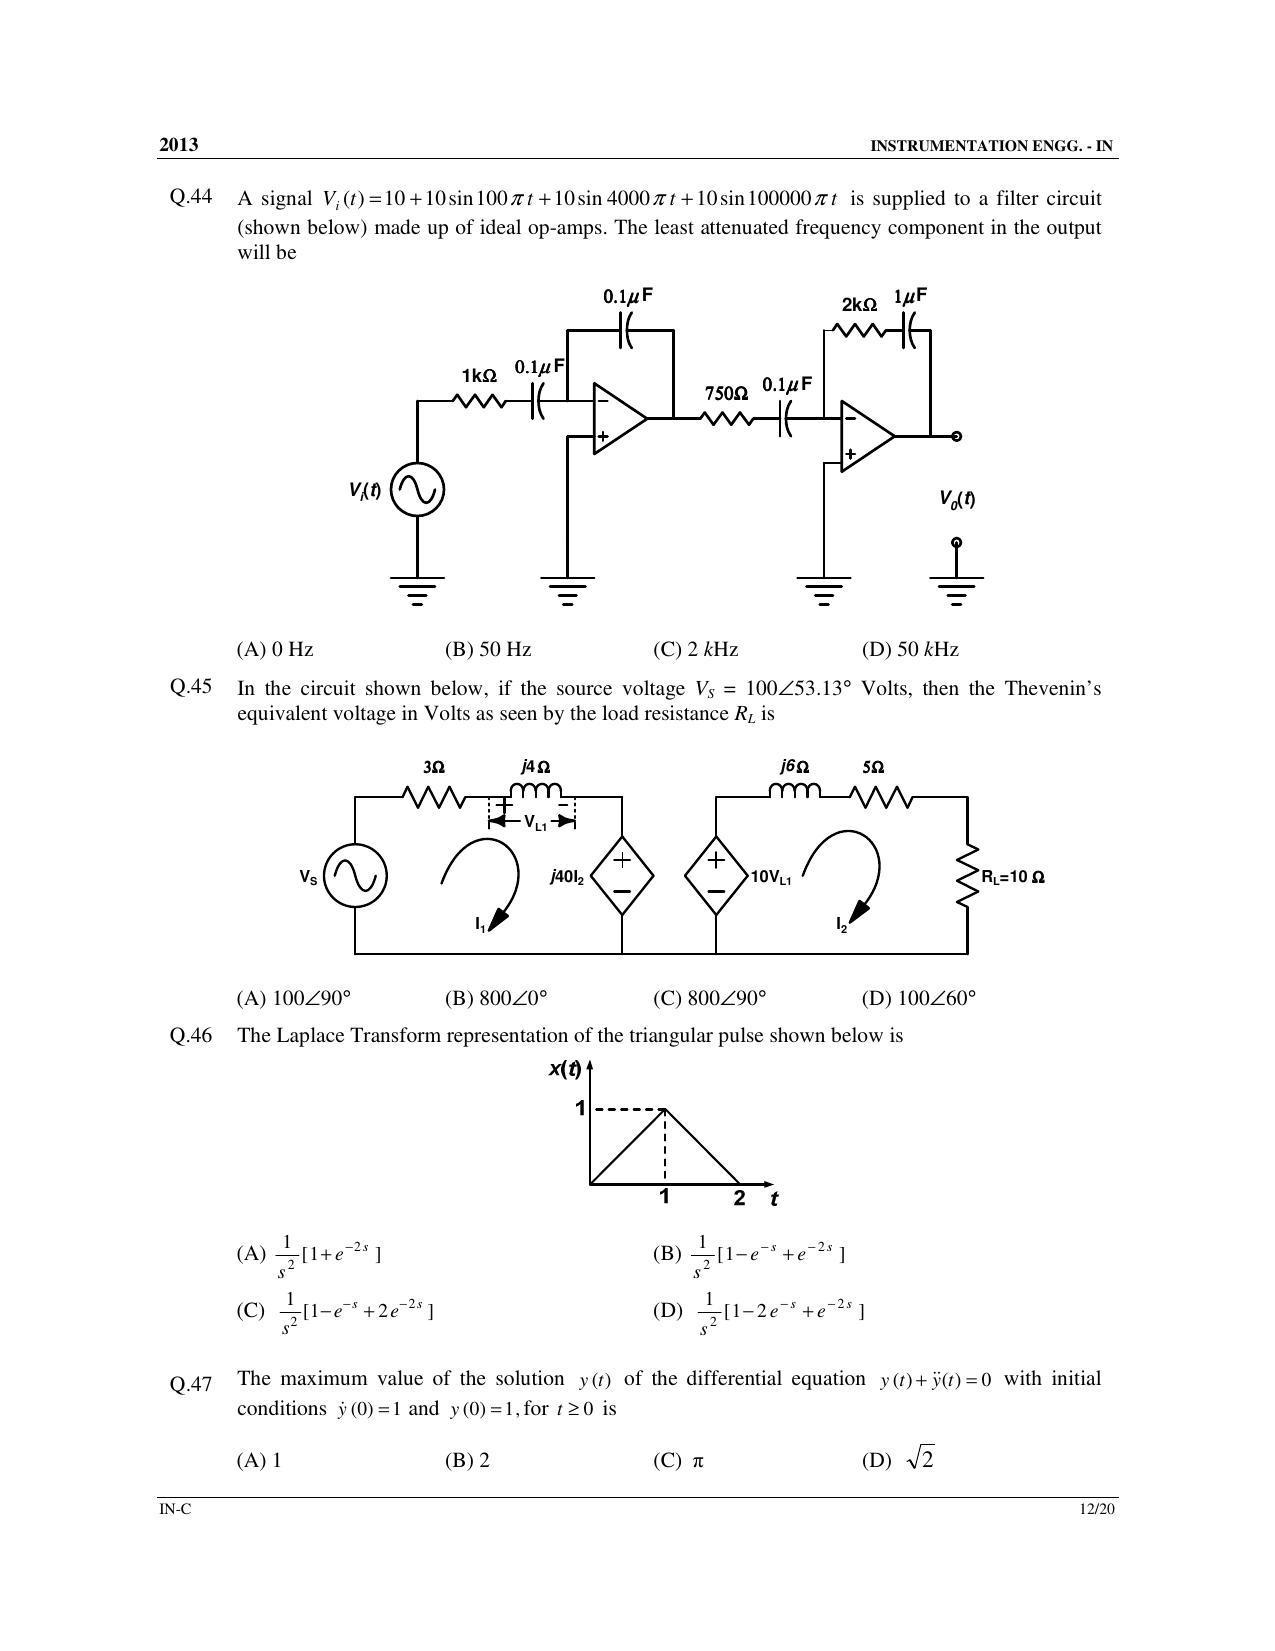 GATE 2013 Instrumentation Engineering (IN) Question Paper with Answer Key - Page 47